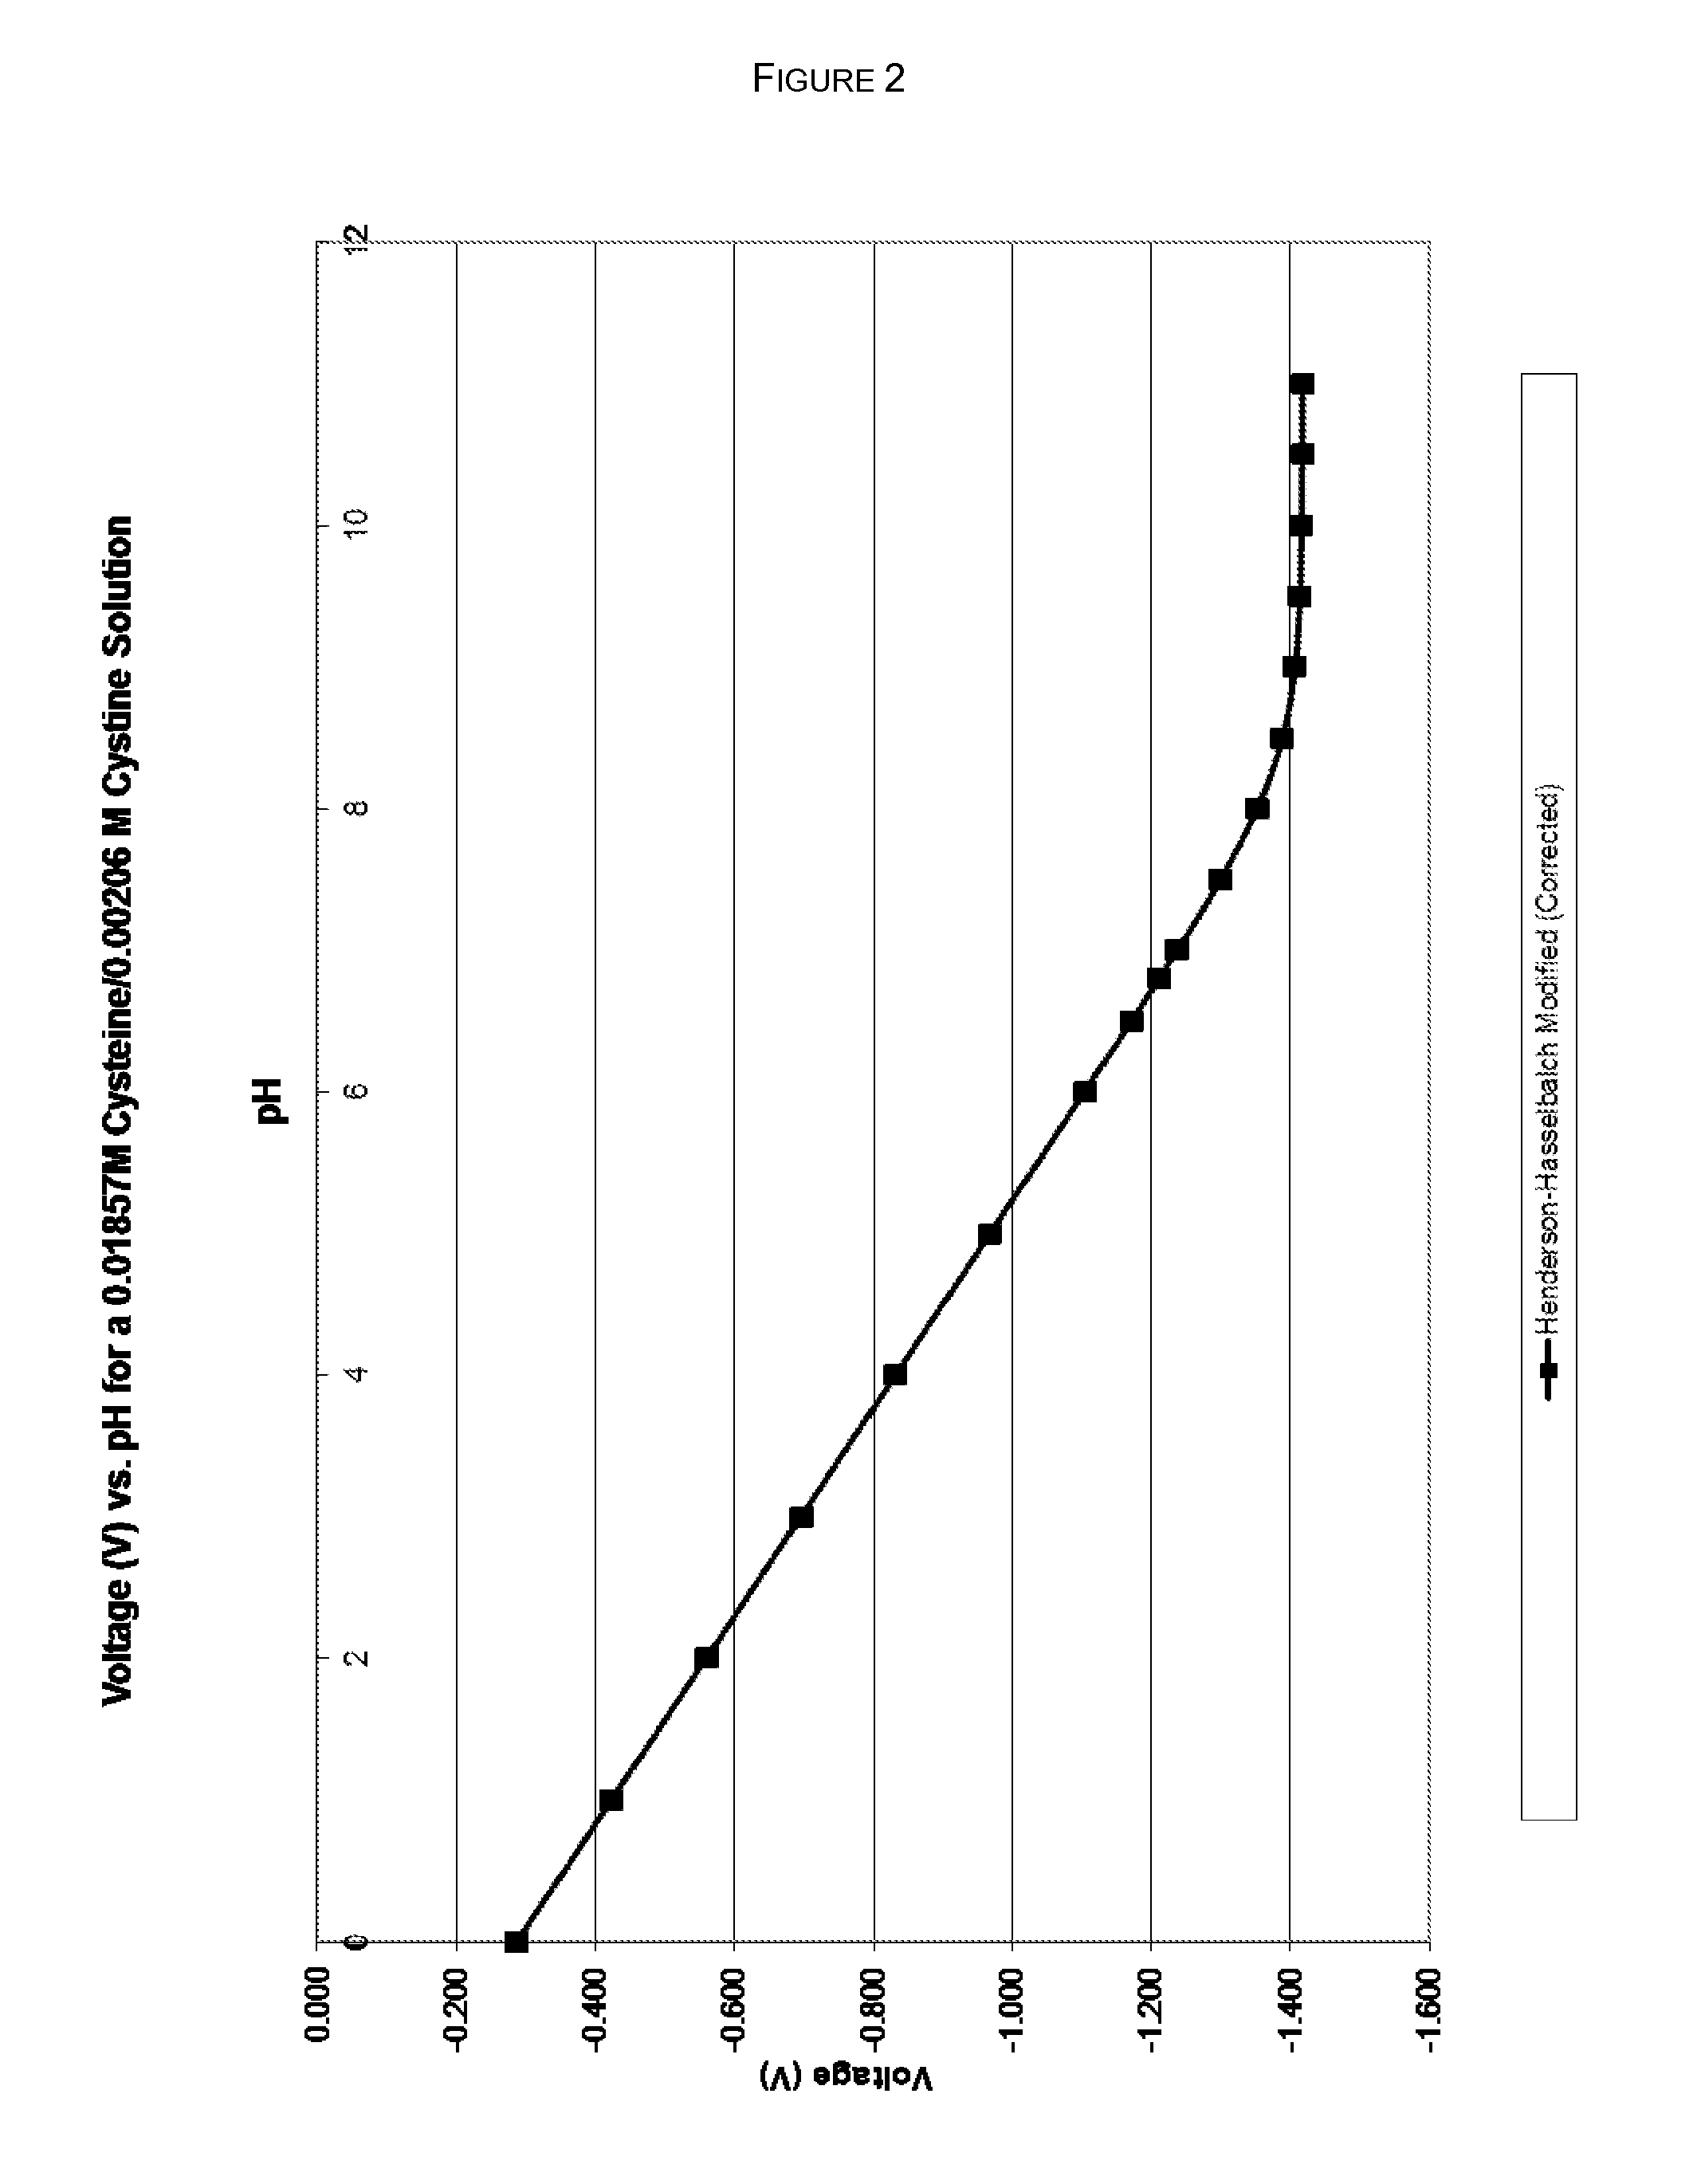 Stabilization of quinol composition such as catecholamine drugs